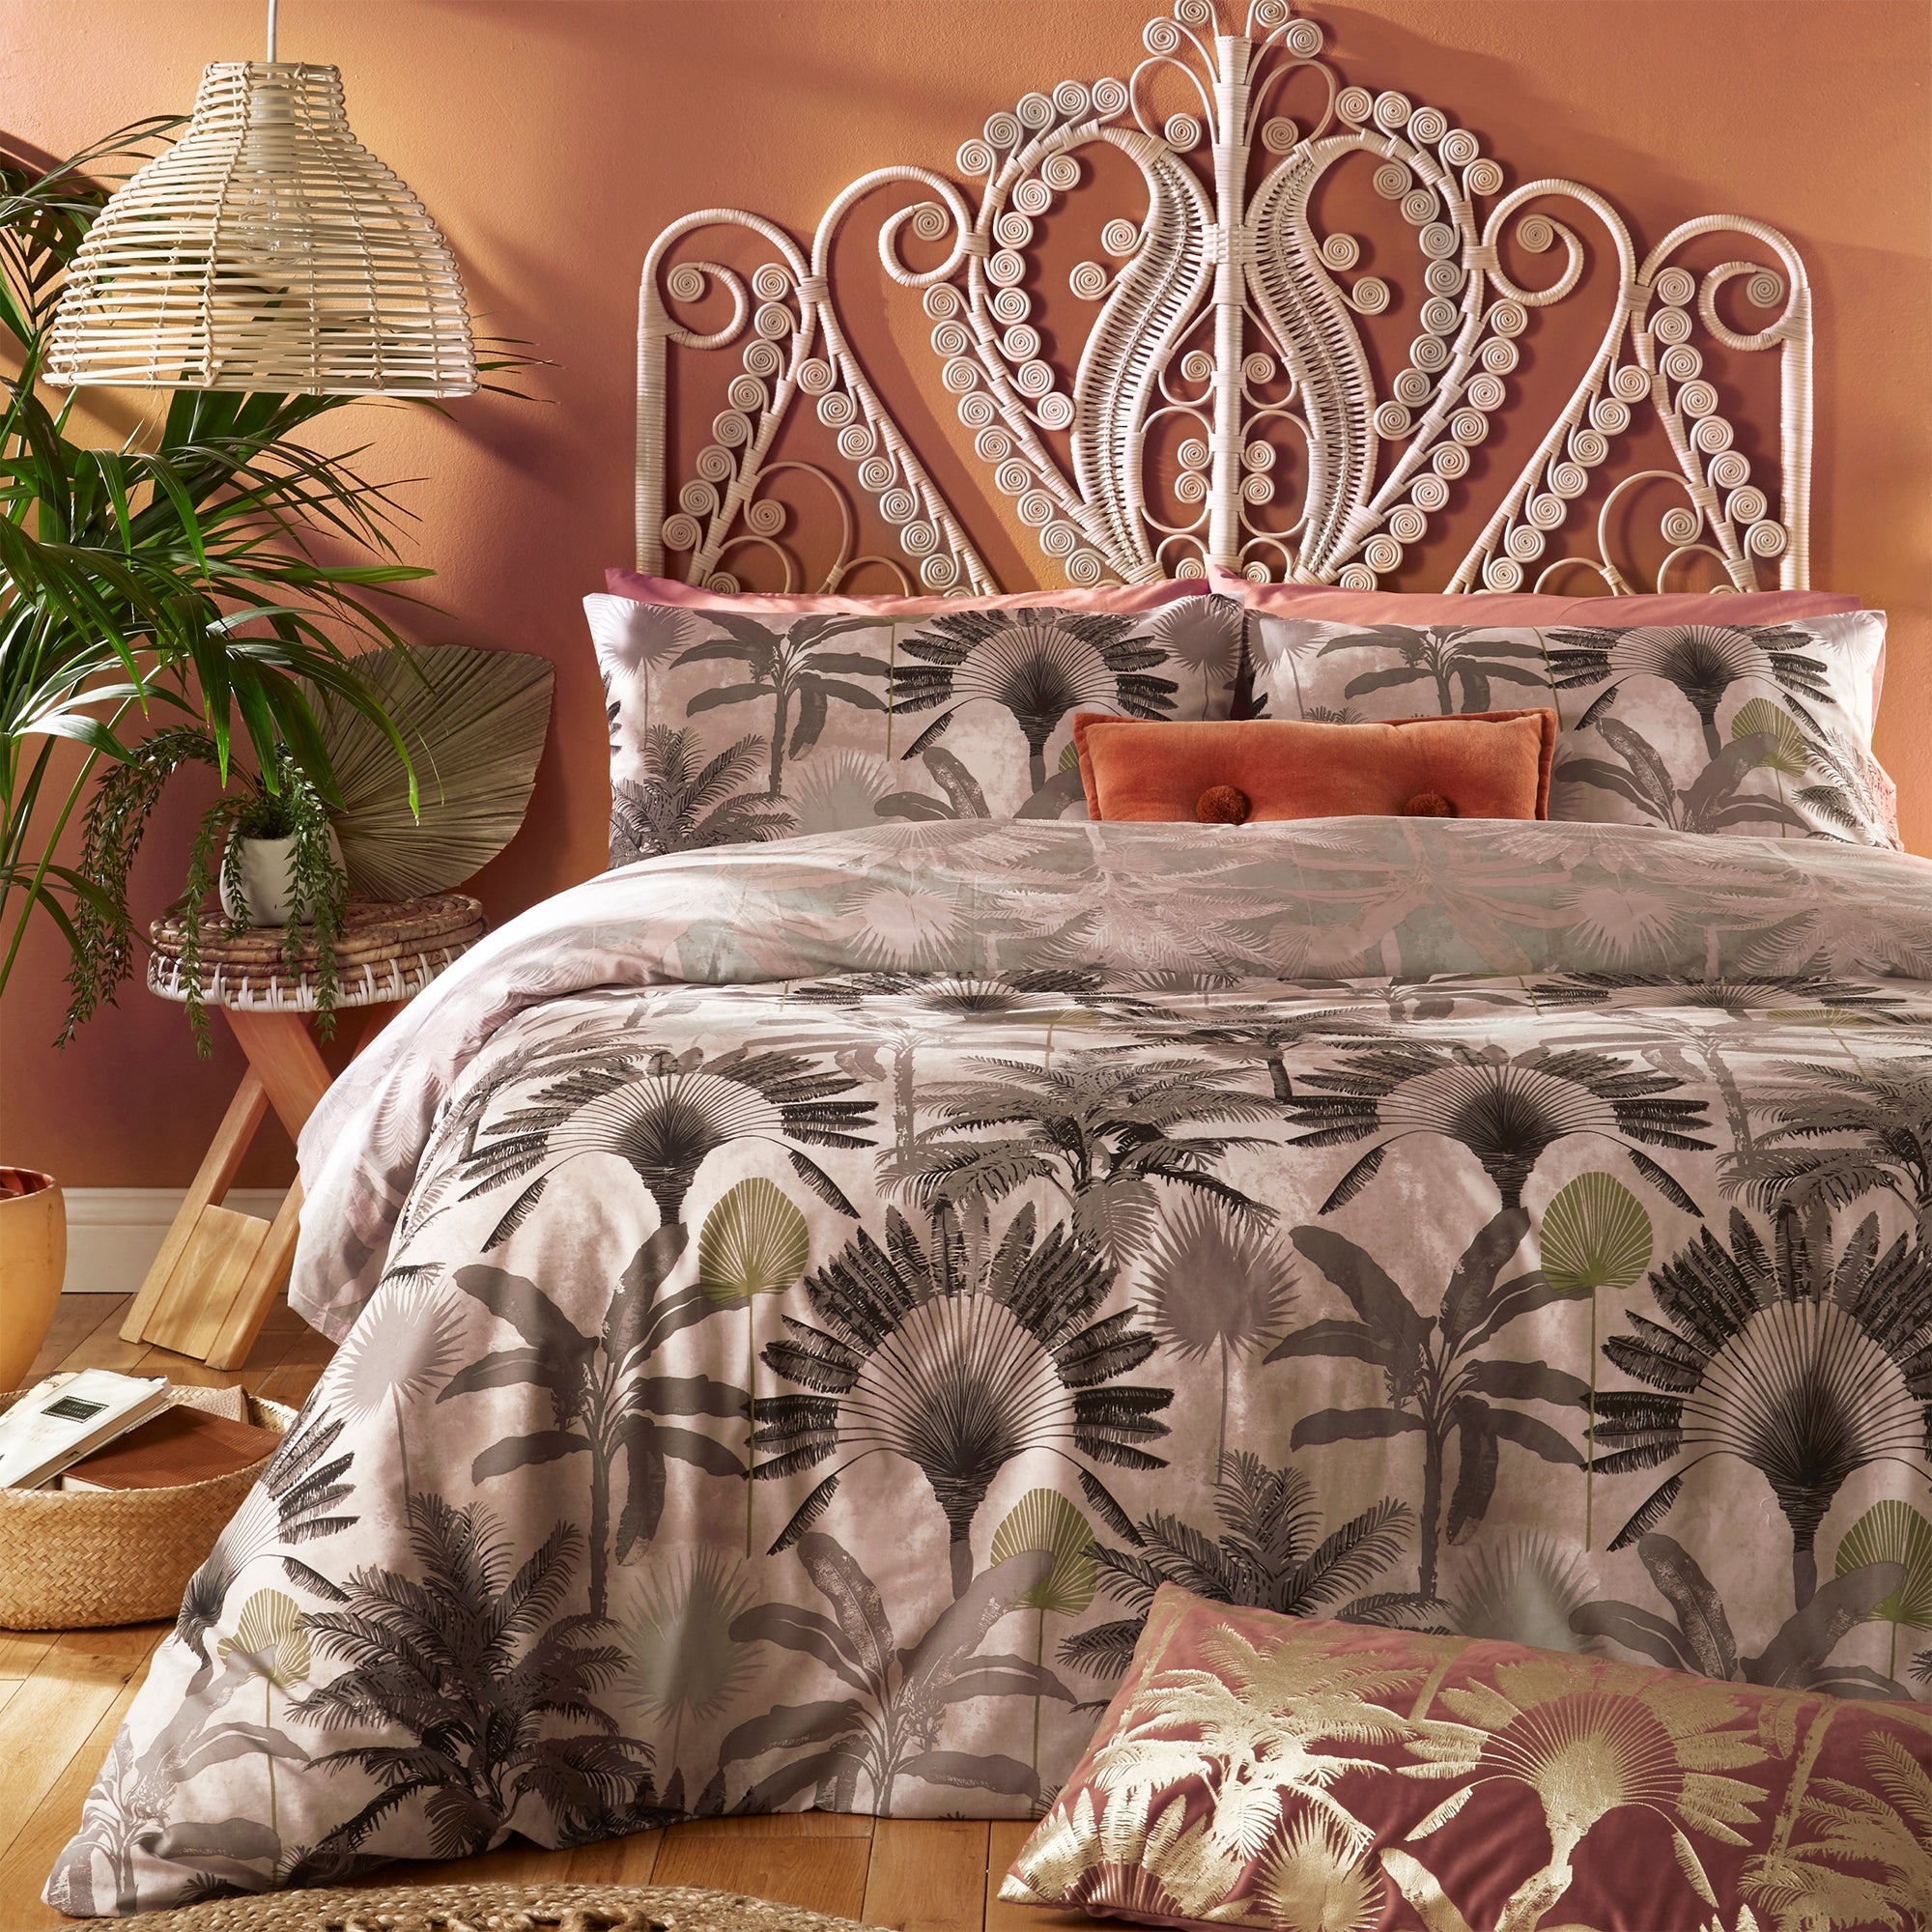 Furn Malaysian Palm Blush Floral Reversible Duvet Cover And Pillowcase Set Pink